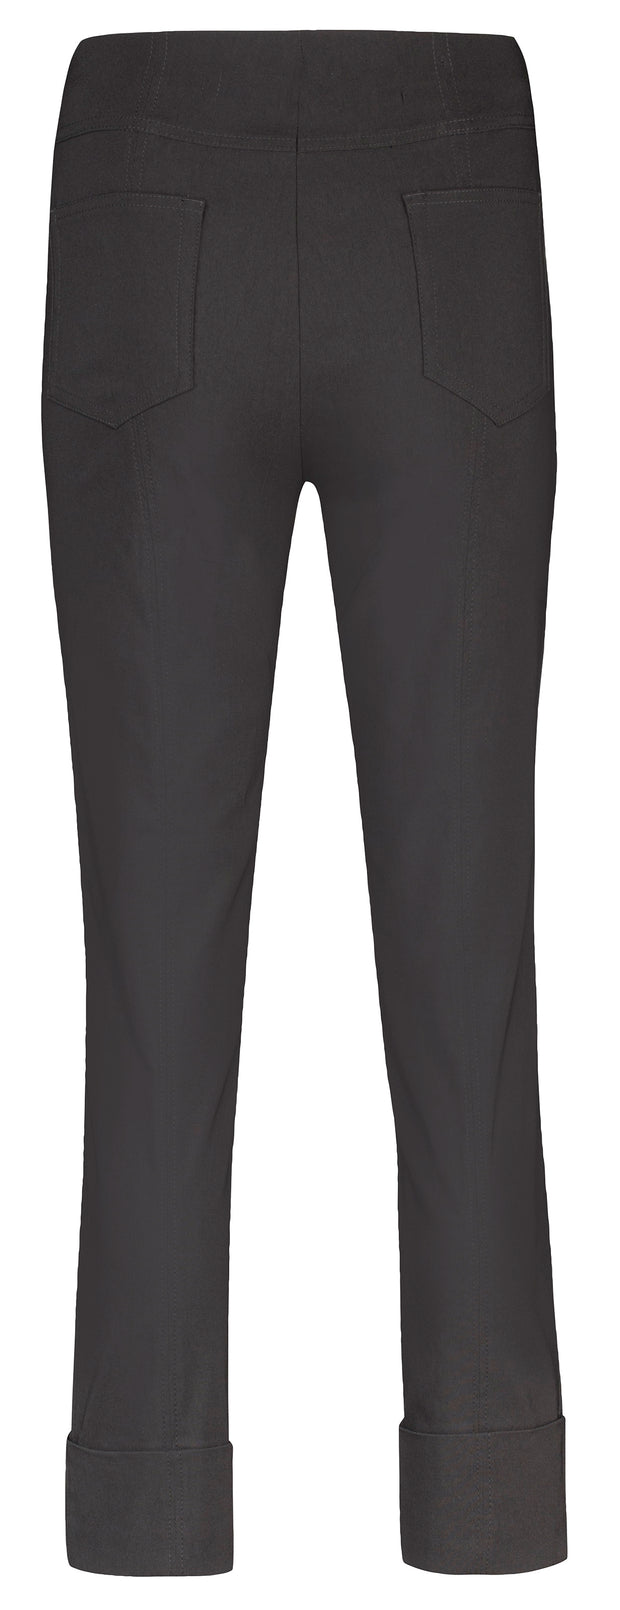 Robell – Bella 09 - Cropped Trouser (7/8 Length) in Various Plain Colours